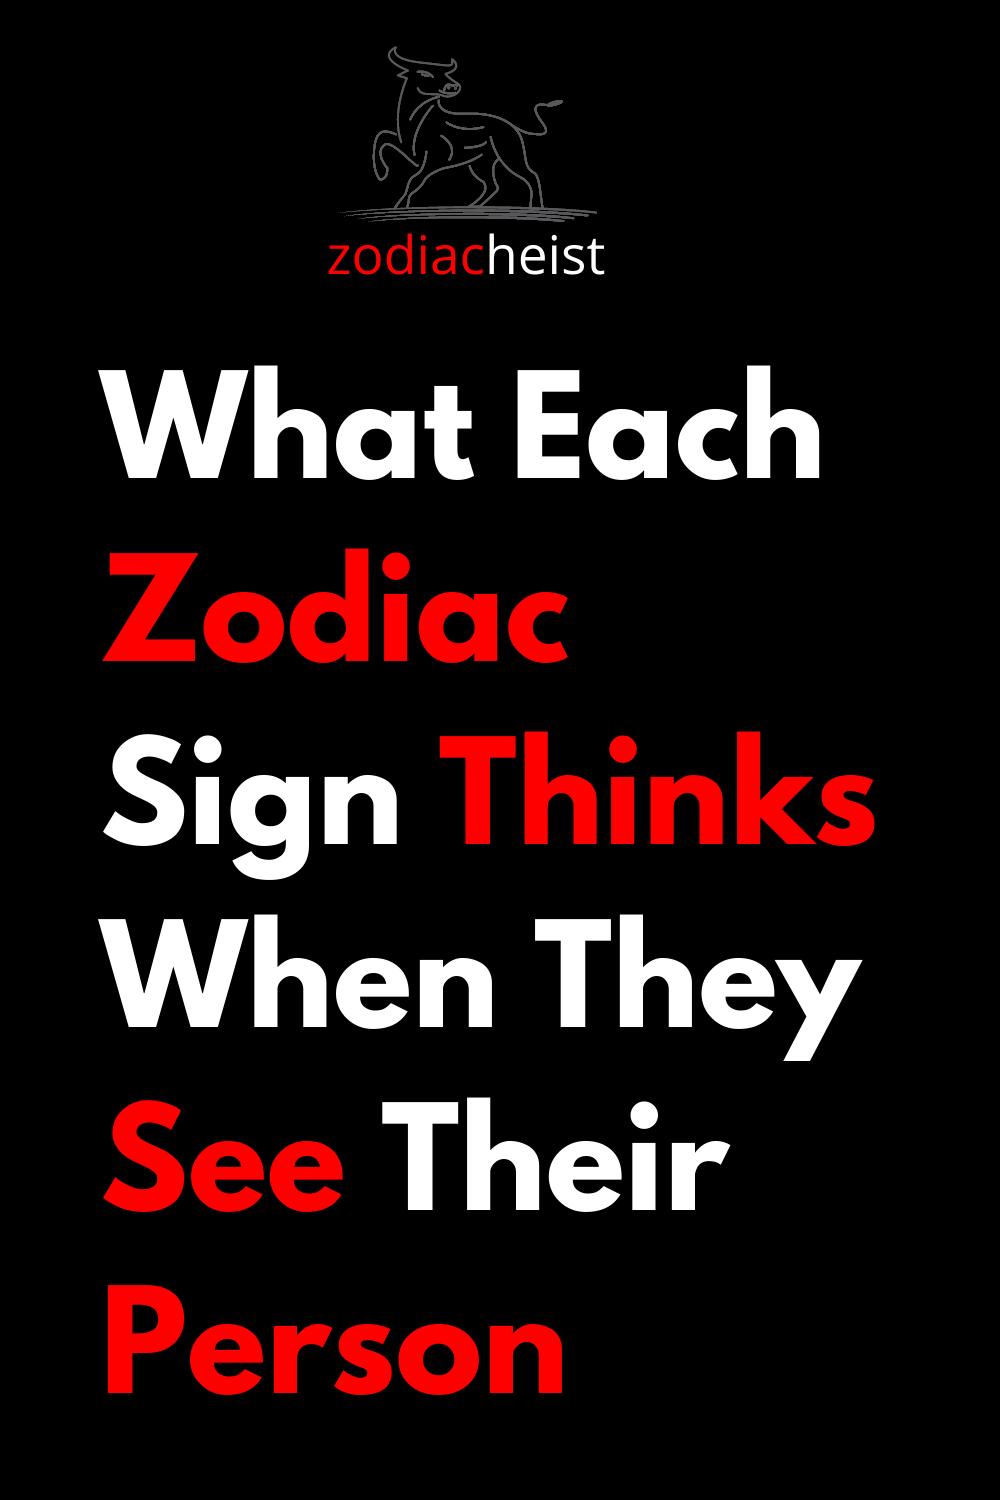 What Each Zodiac Sign Thinks When They See Their Person